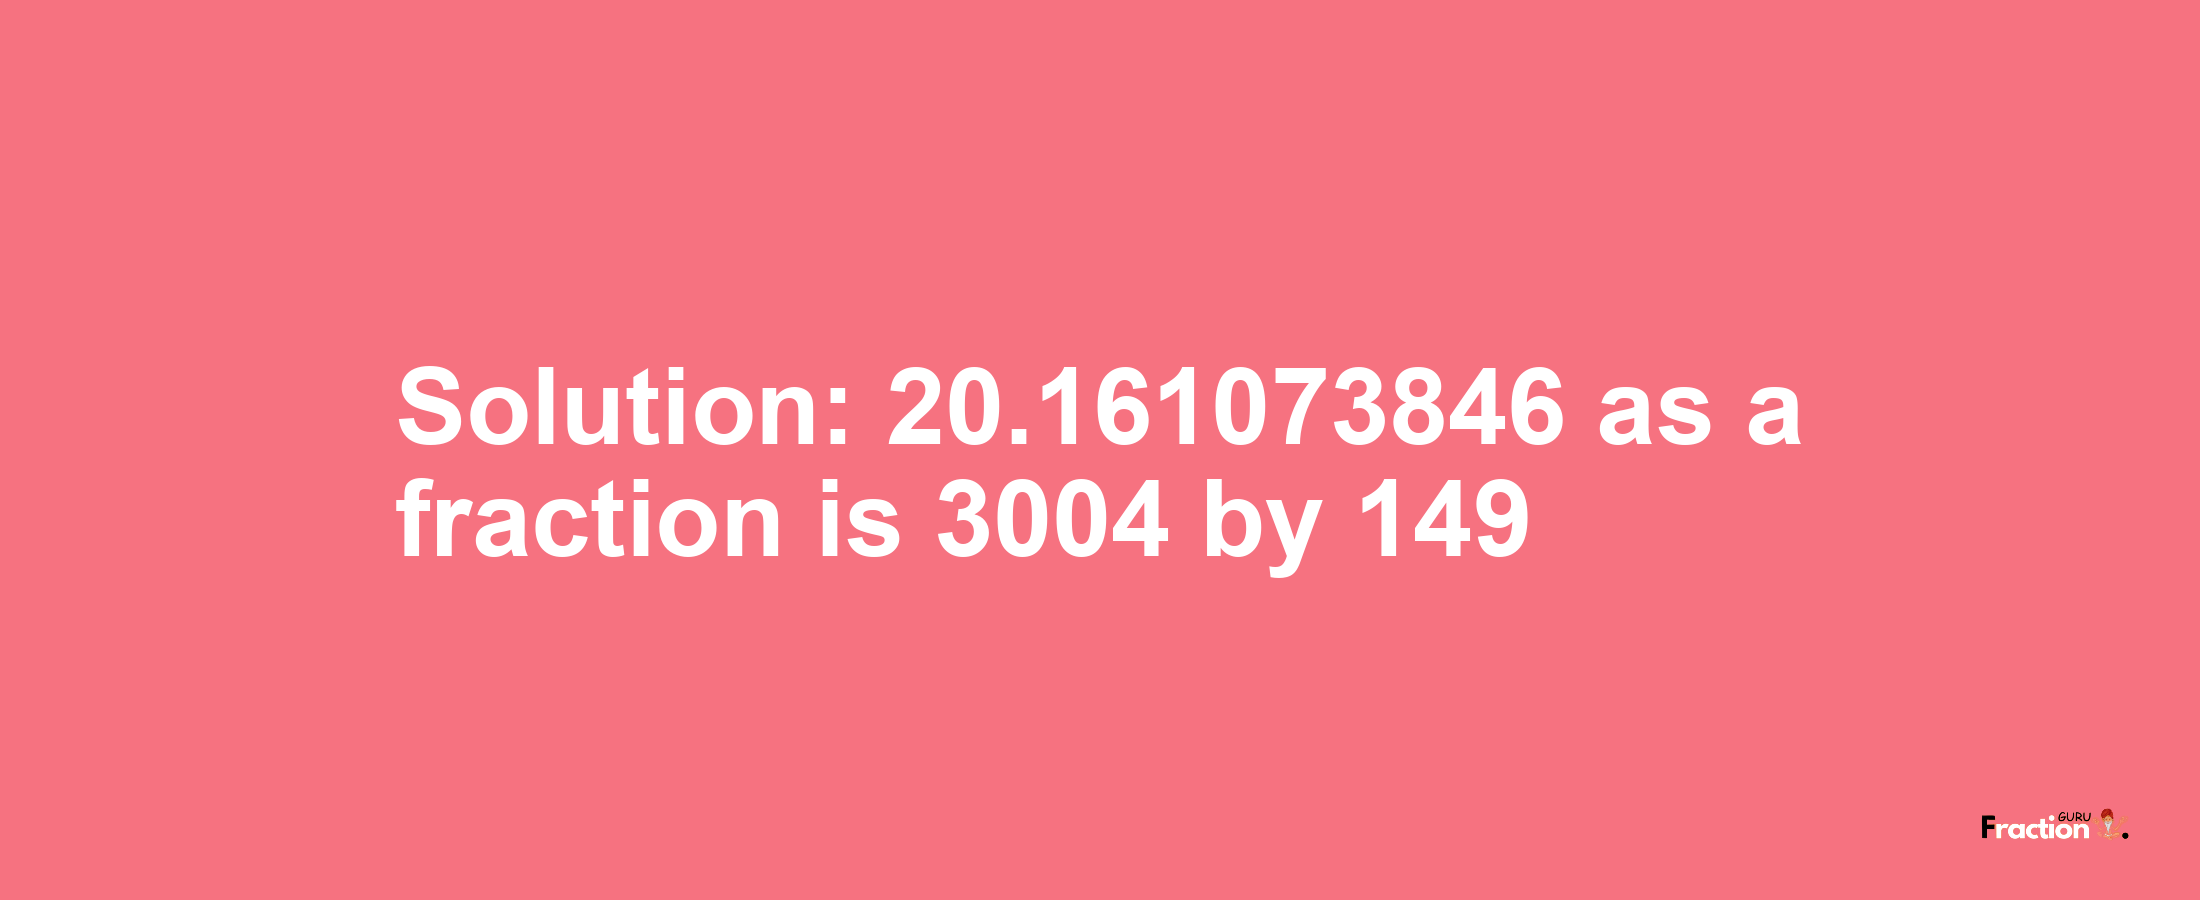 Solution:20.161073846 as a fraction is 3004/149